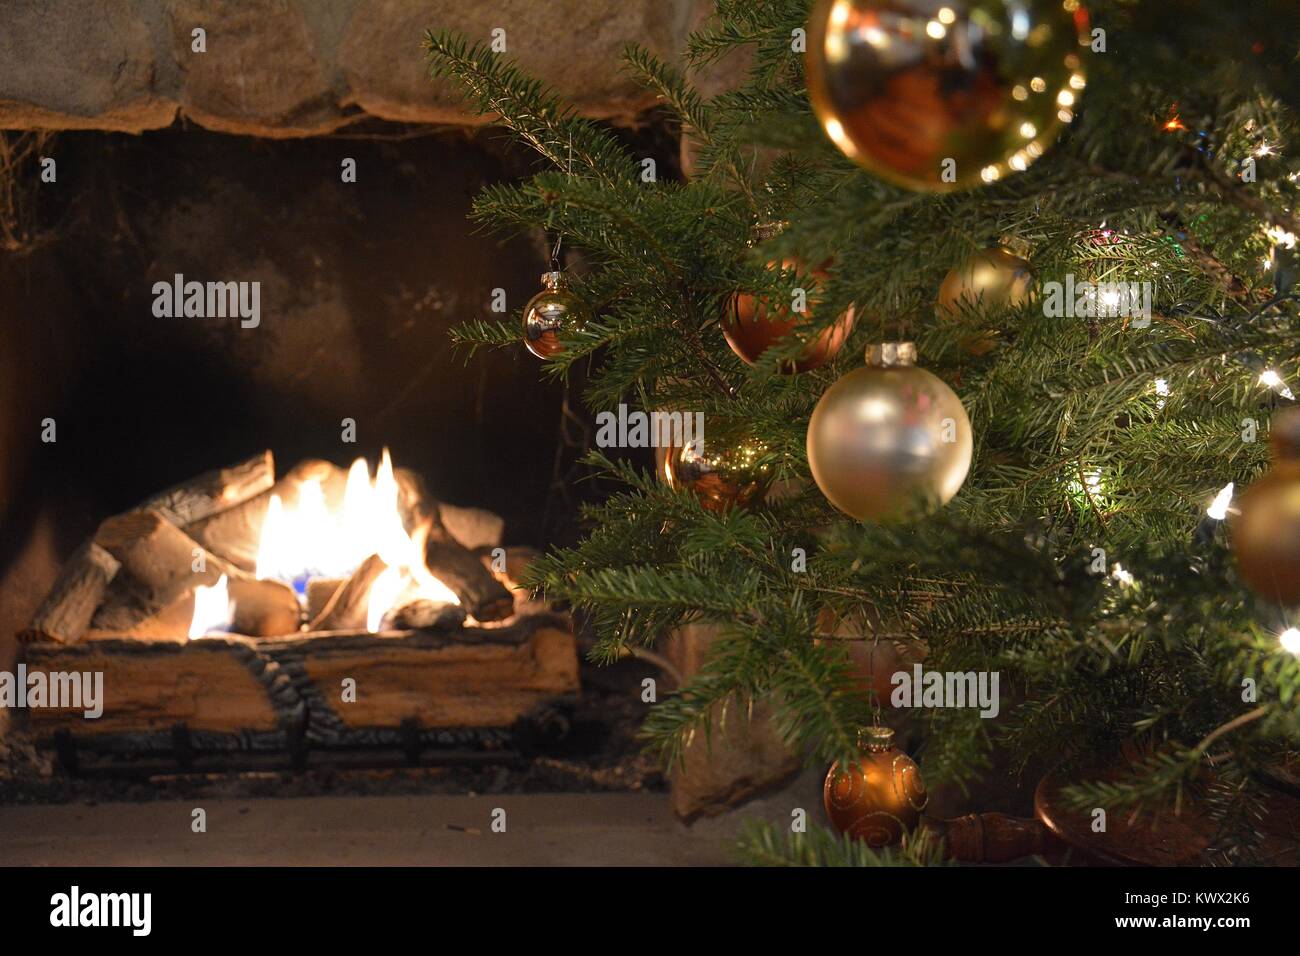 A Christmas with Christmas Decorations, such as stockings label M & G next to a warm fire during the holiday season, in New York, USA Stock Photo